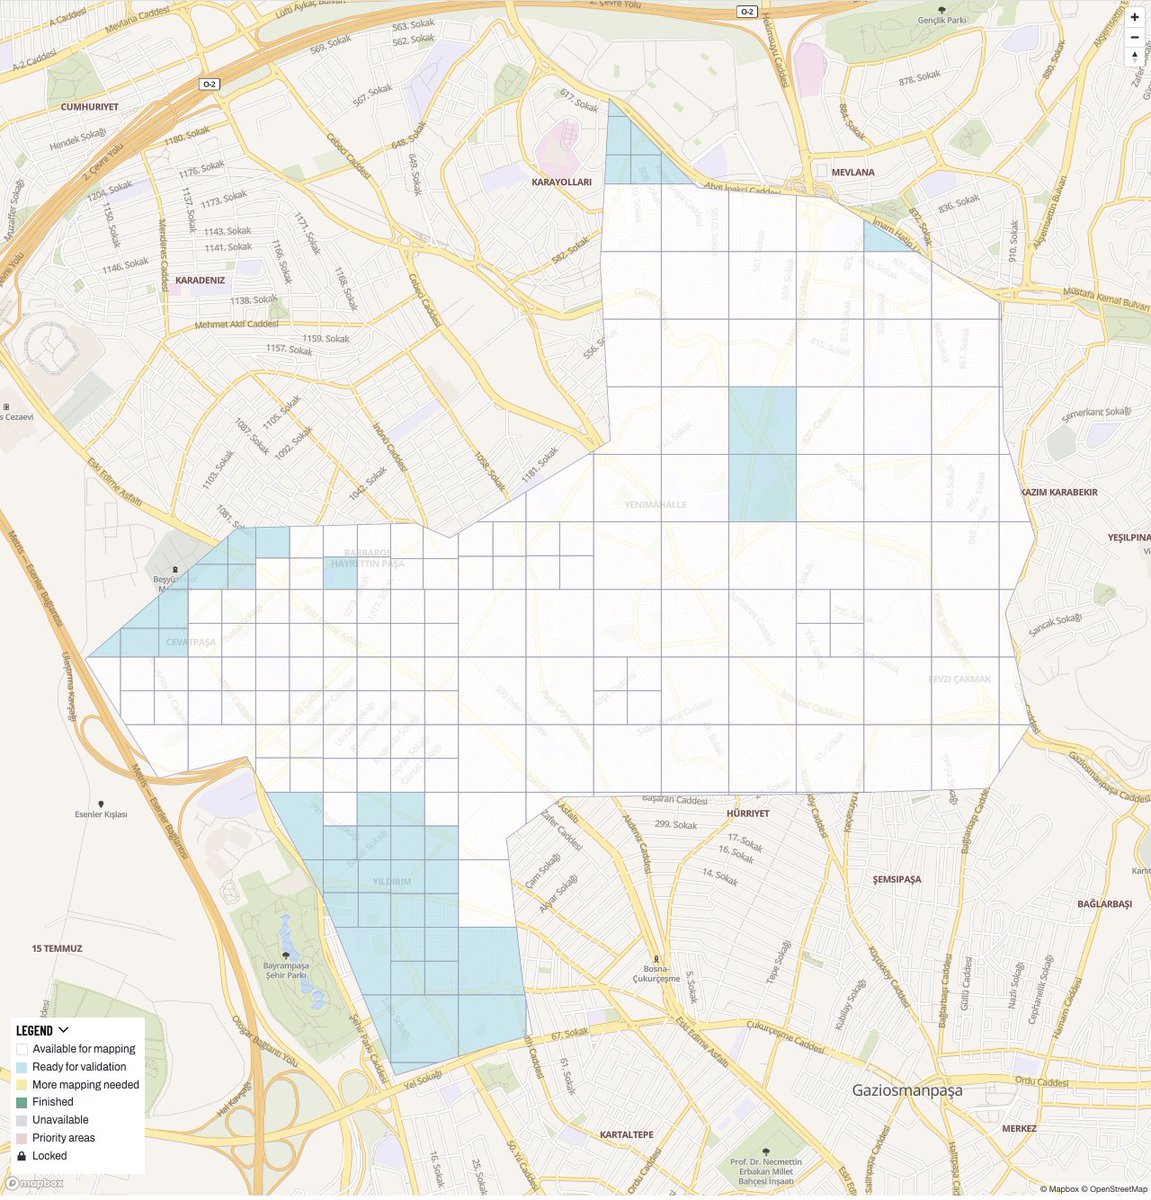 🚨 New @hotosm TM project Alert! We launched new project in Istanbul as part of our earthquake preparedness effort. Previously we mapped more than 39 thousands buildings with 73 volunteers. Map with us: tasks.hotosm.org/projects/16415